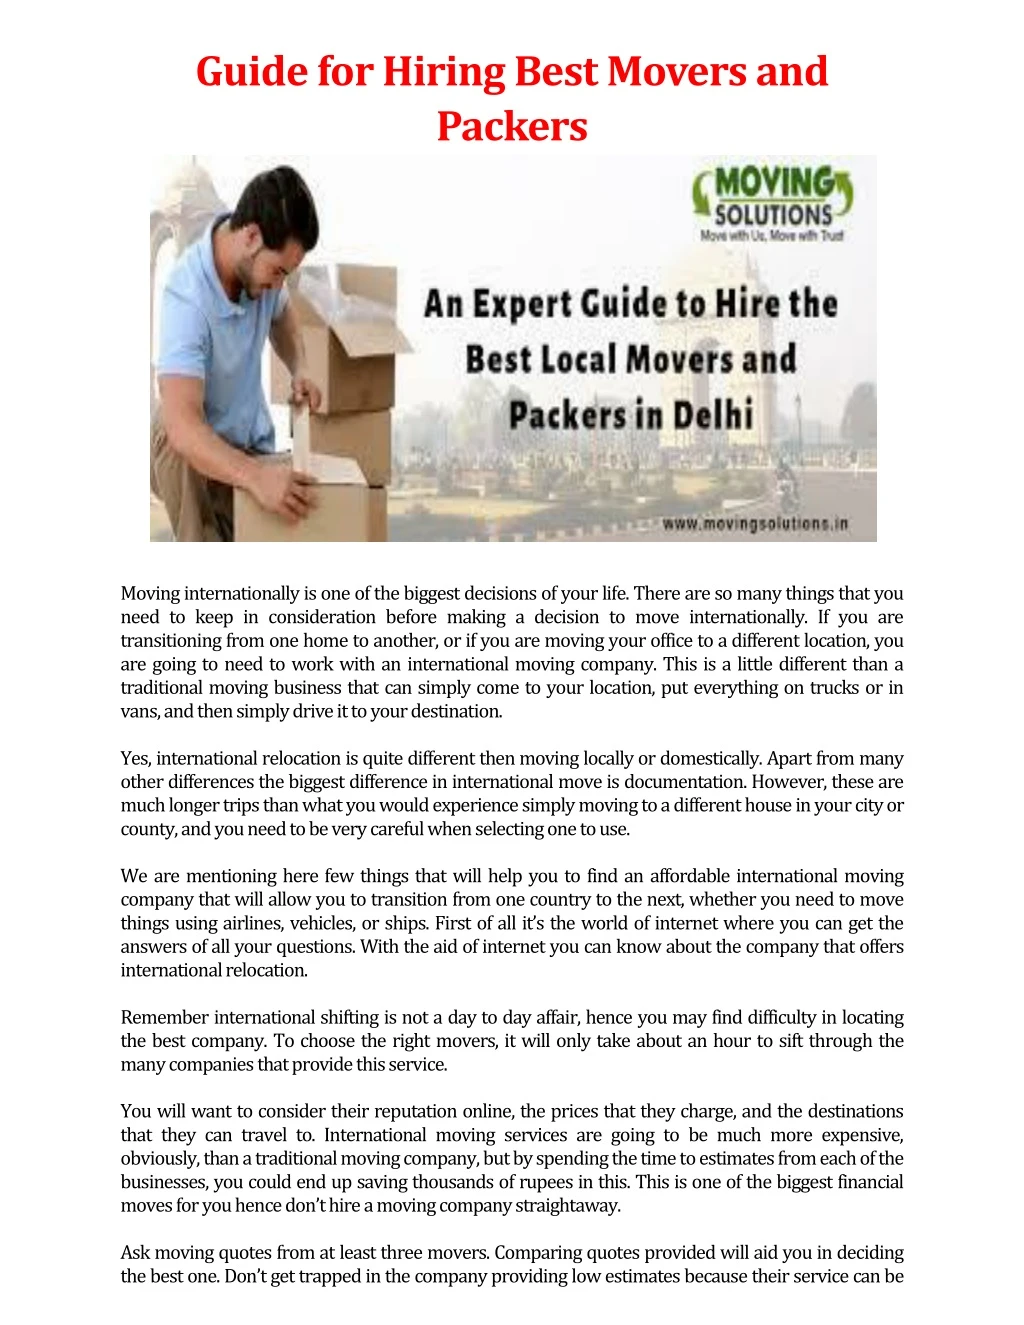 guide for hiring best movers and packers